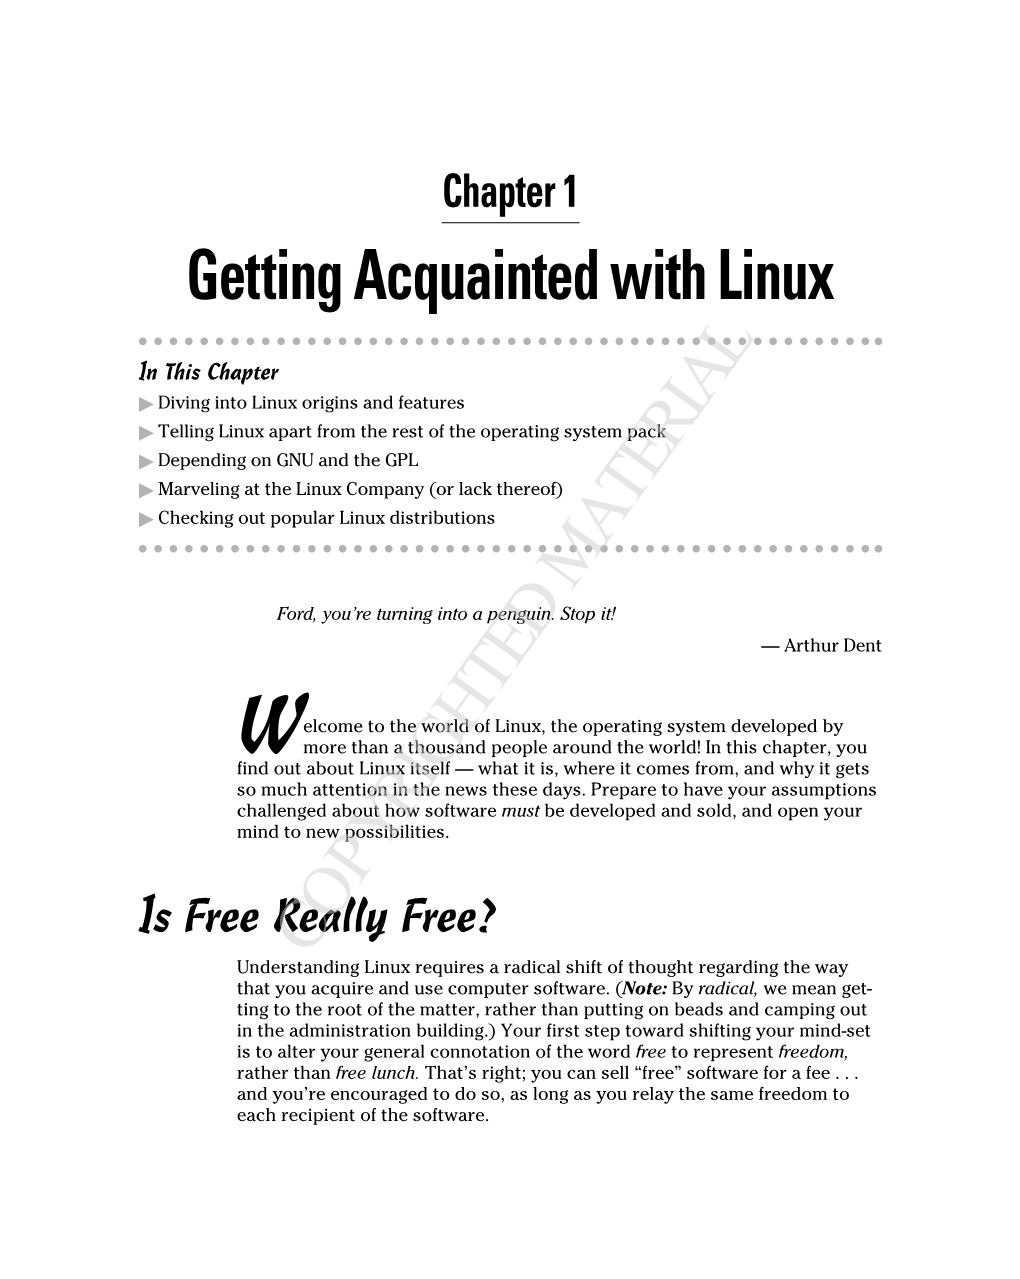 Getting Acquainted with Linux